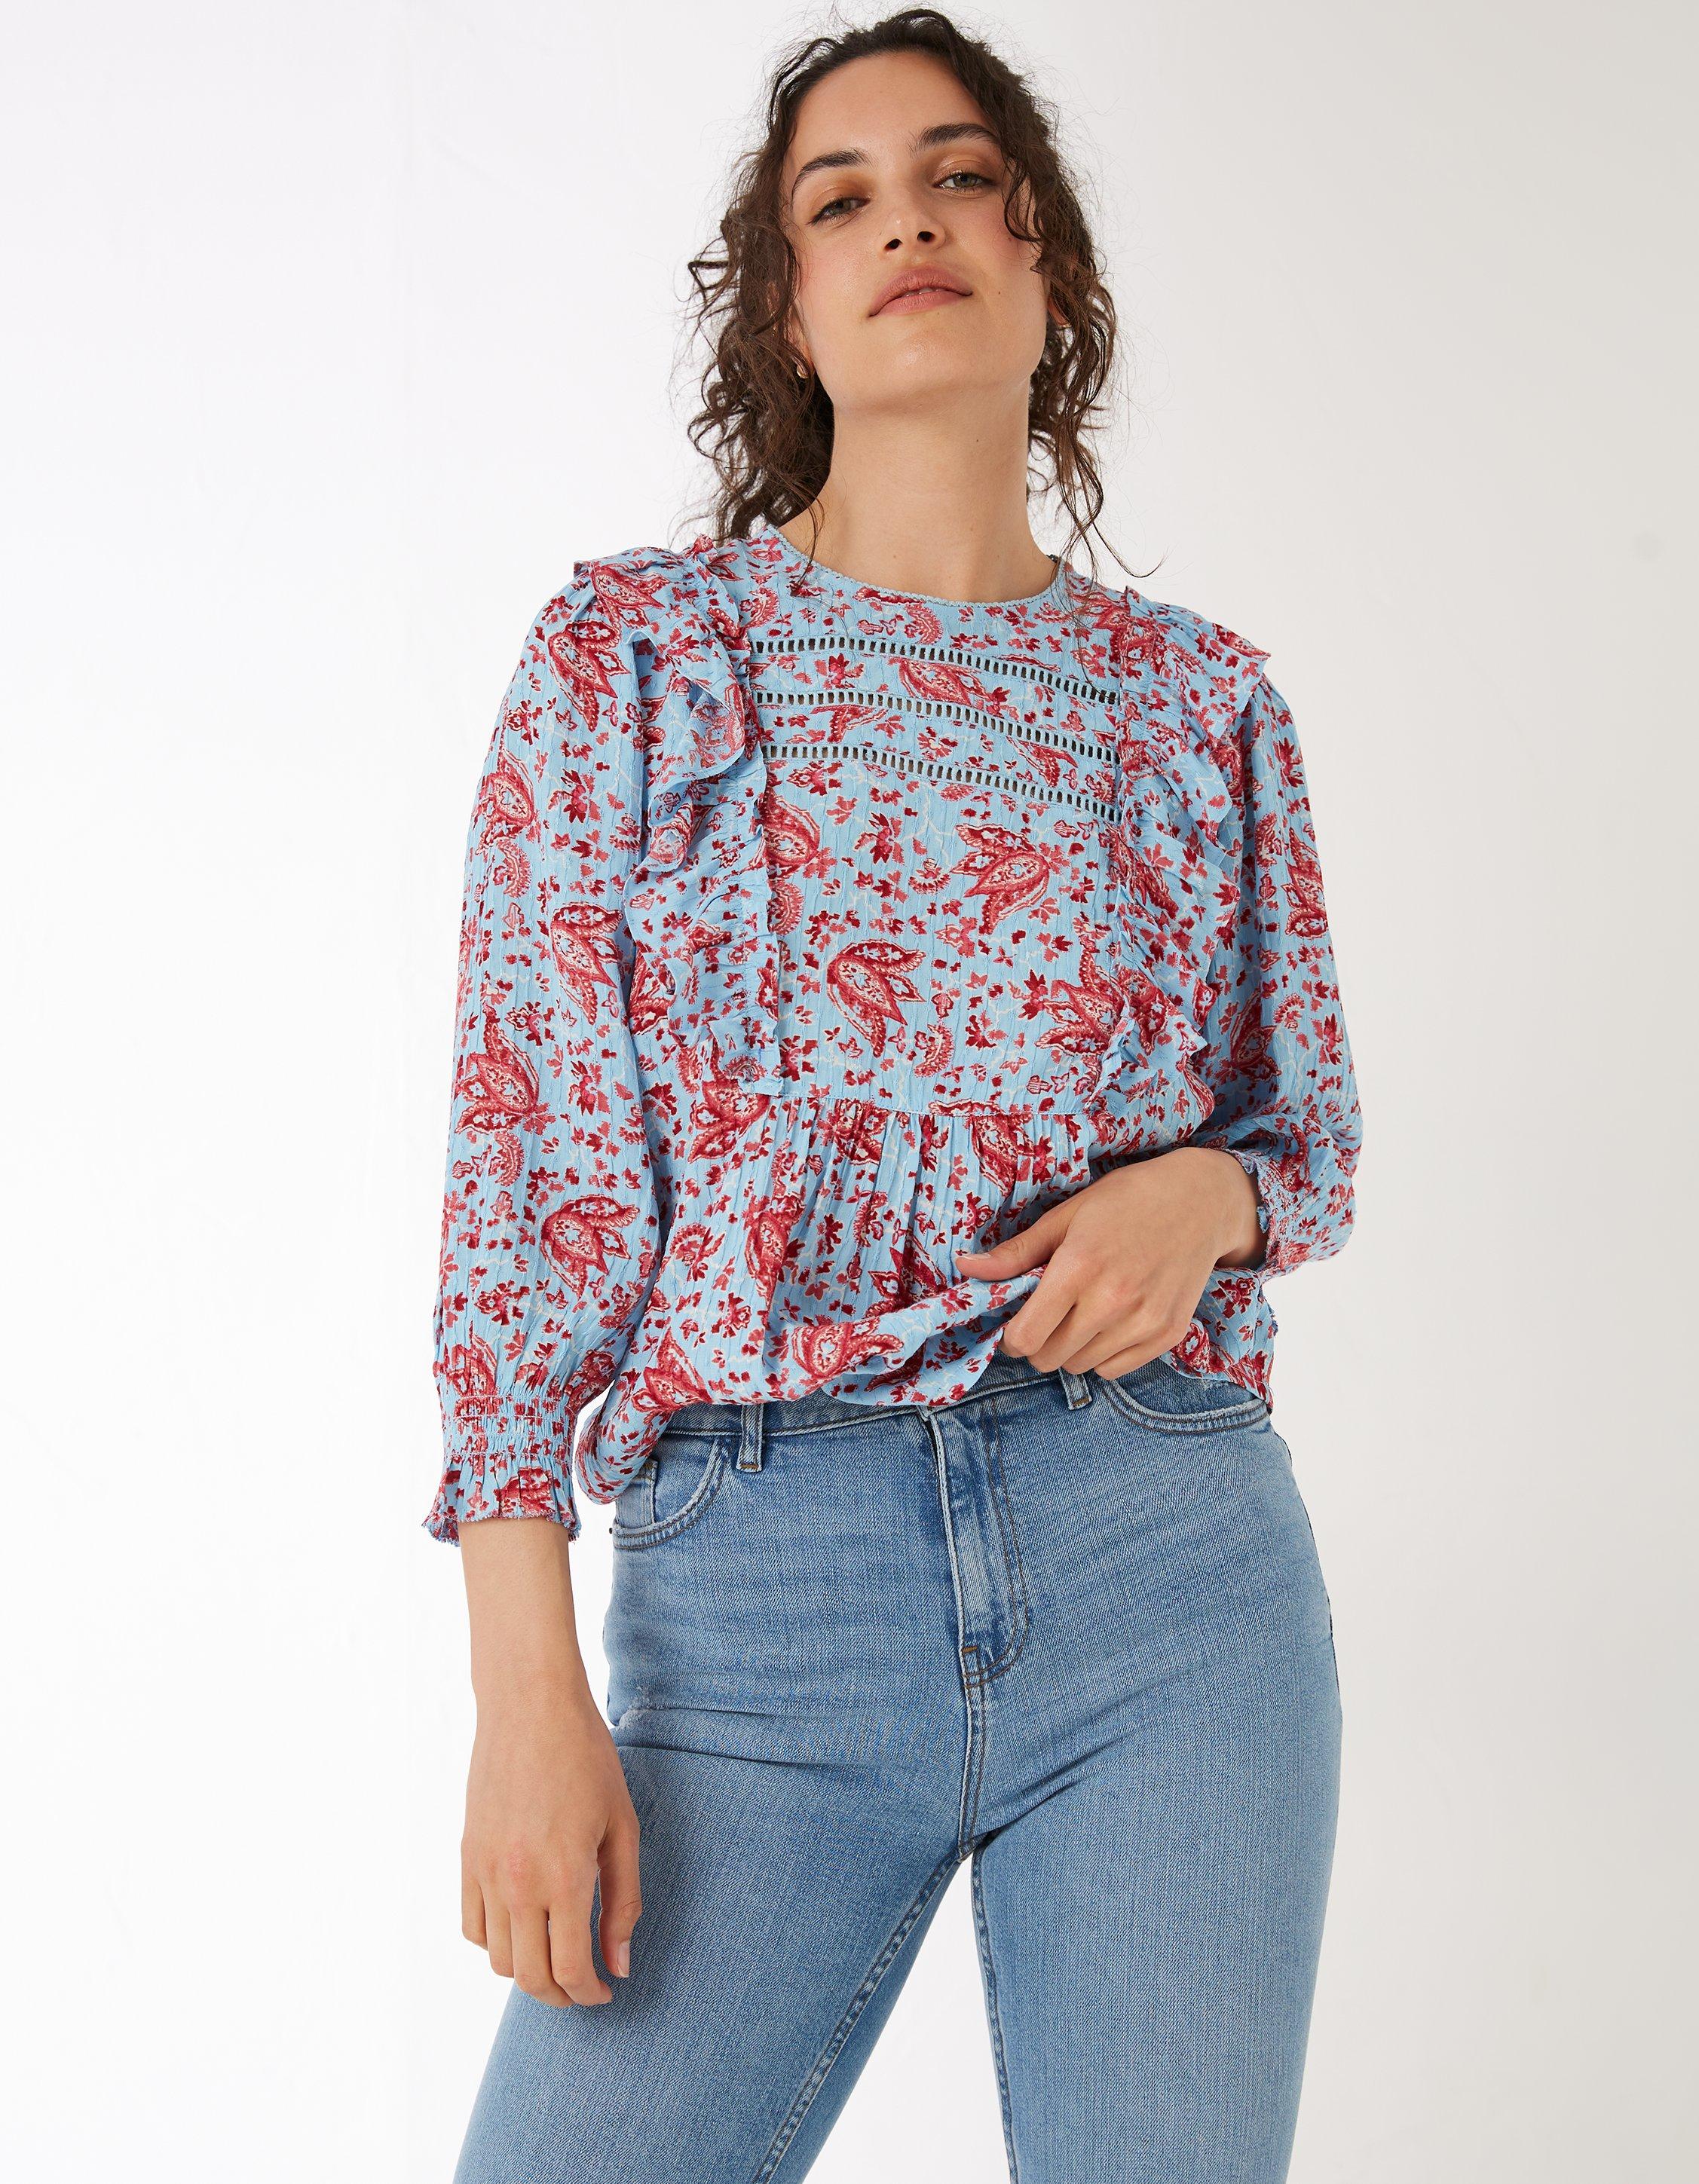 Rye Floral Craft Blouse, Shirts & Blouses | FatFace.com